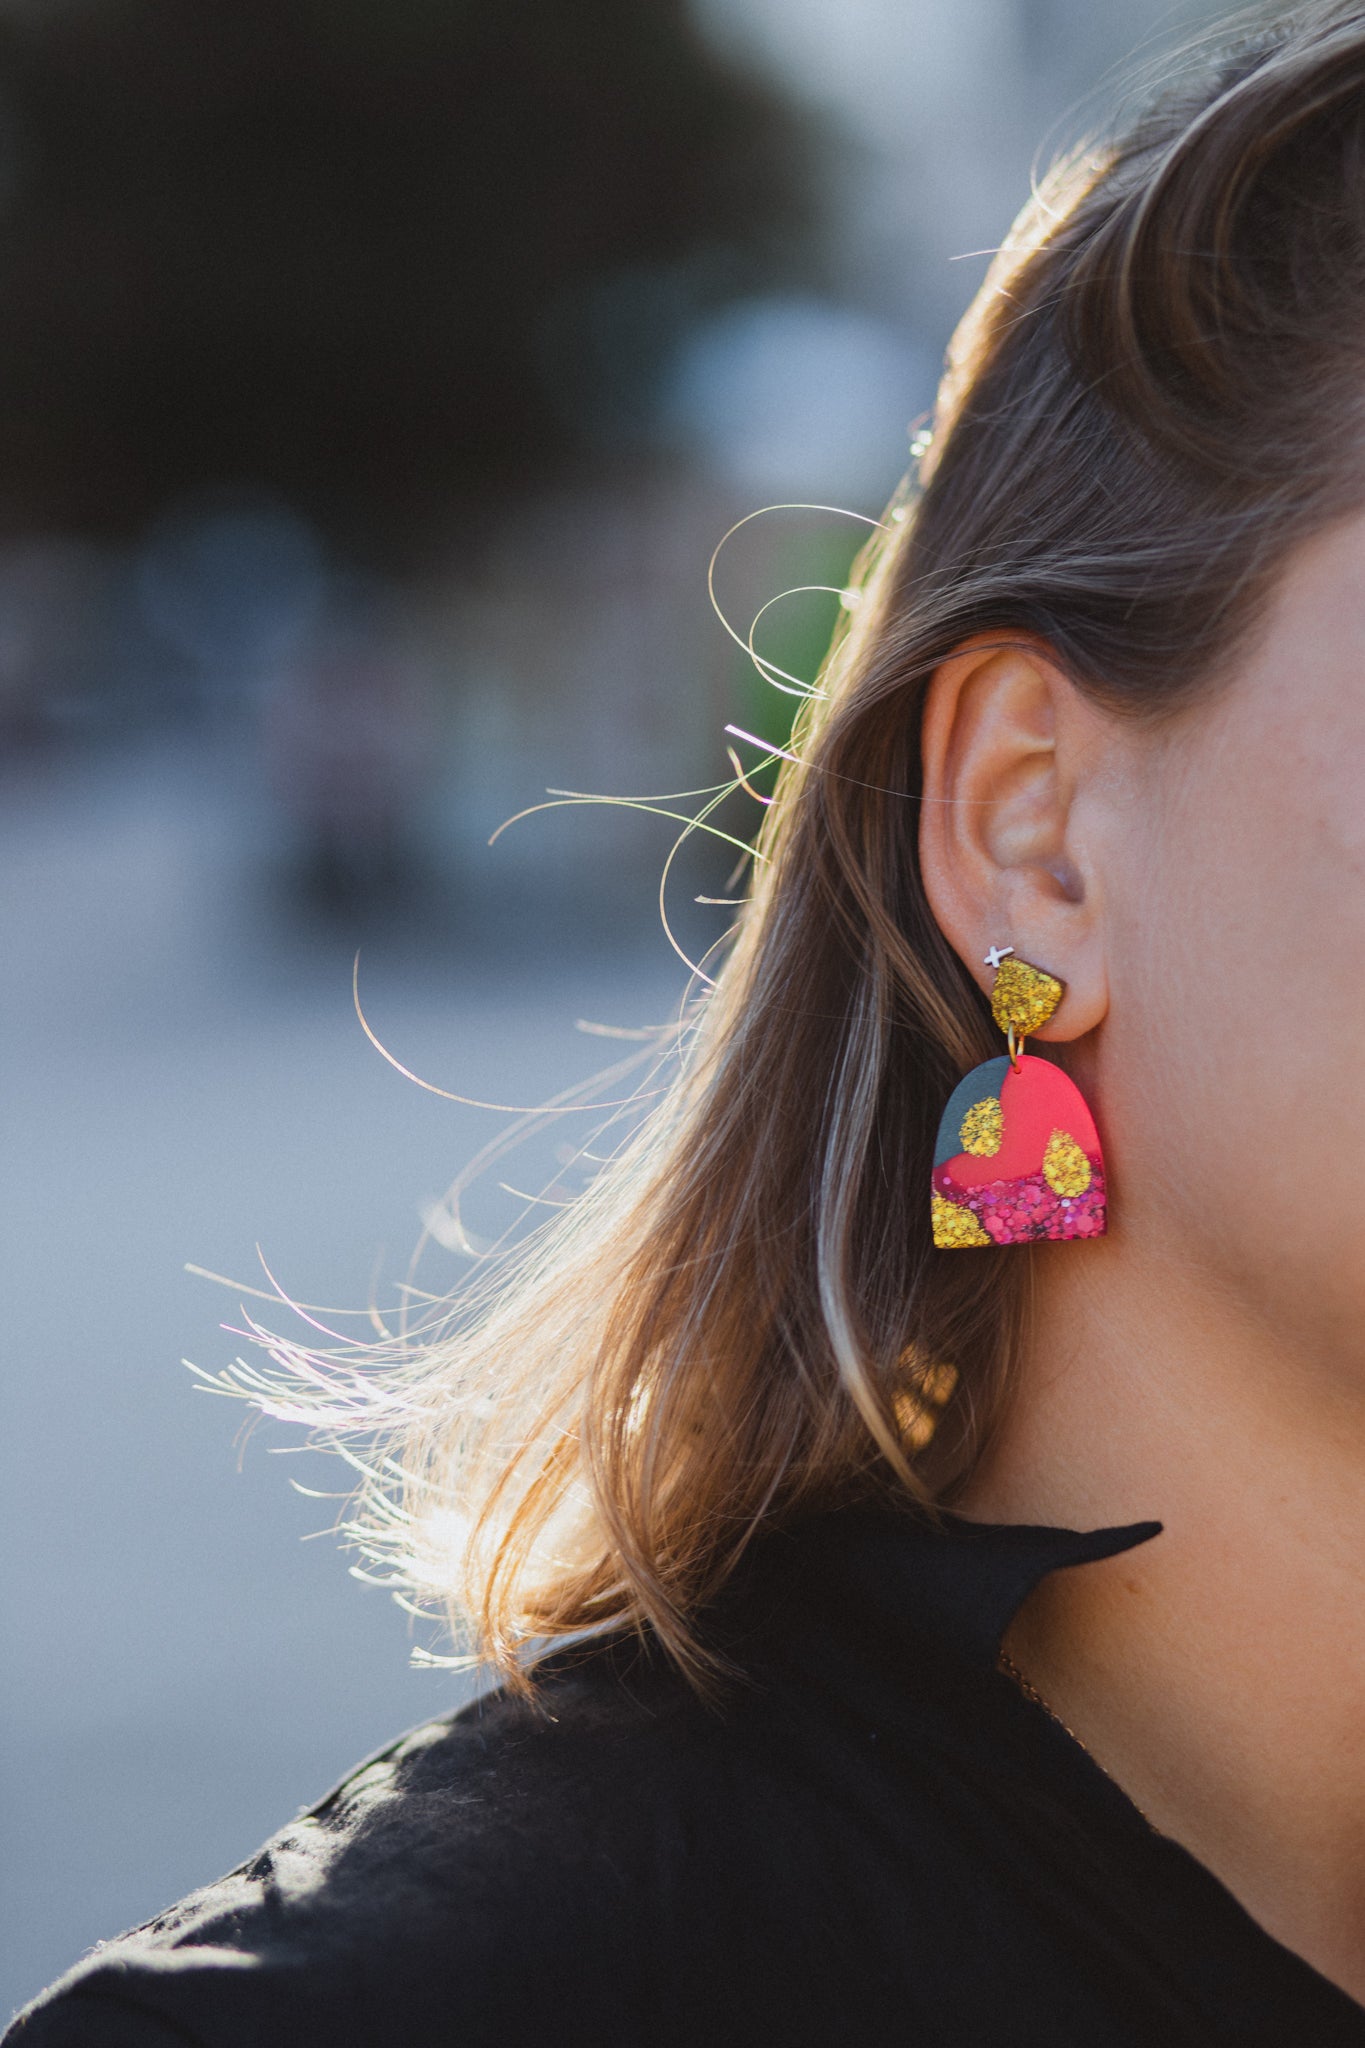 Cute bright statement earrings with stainless steel posts